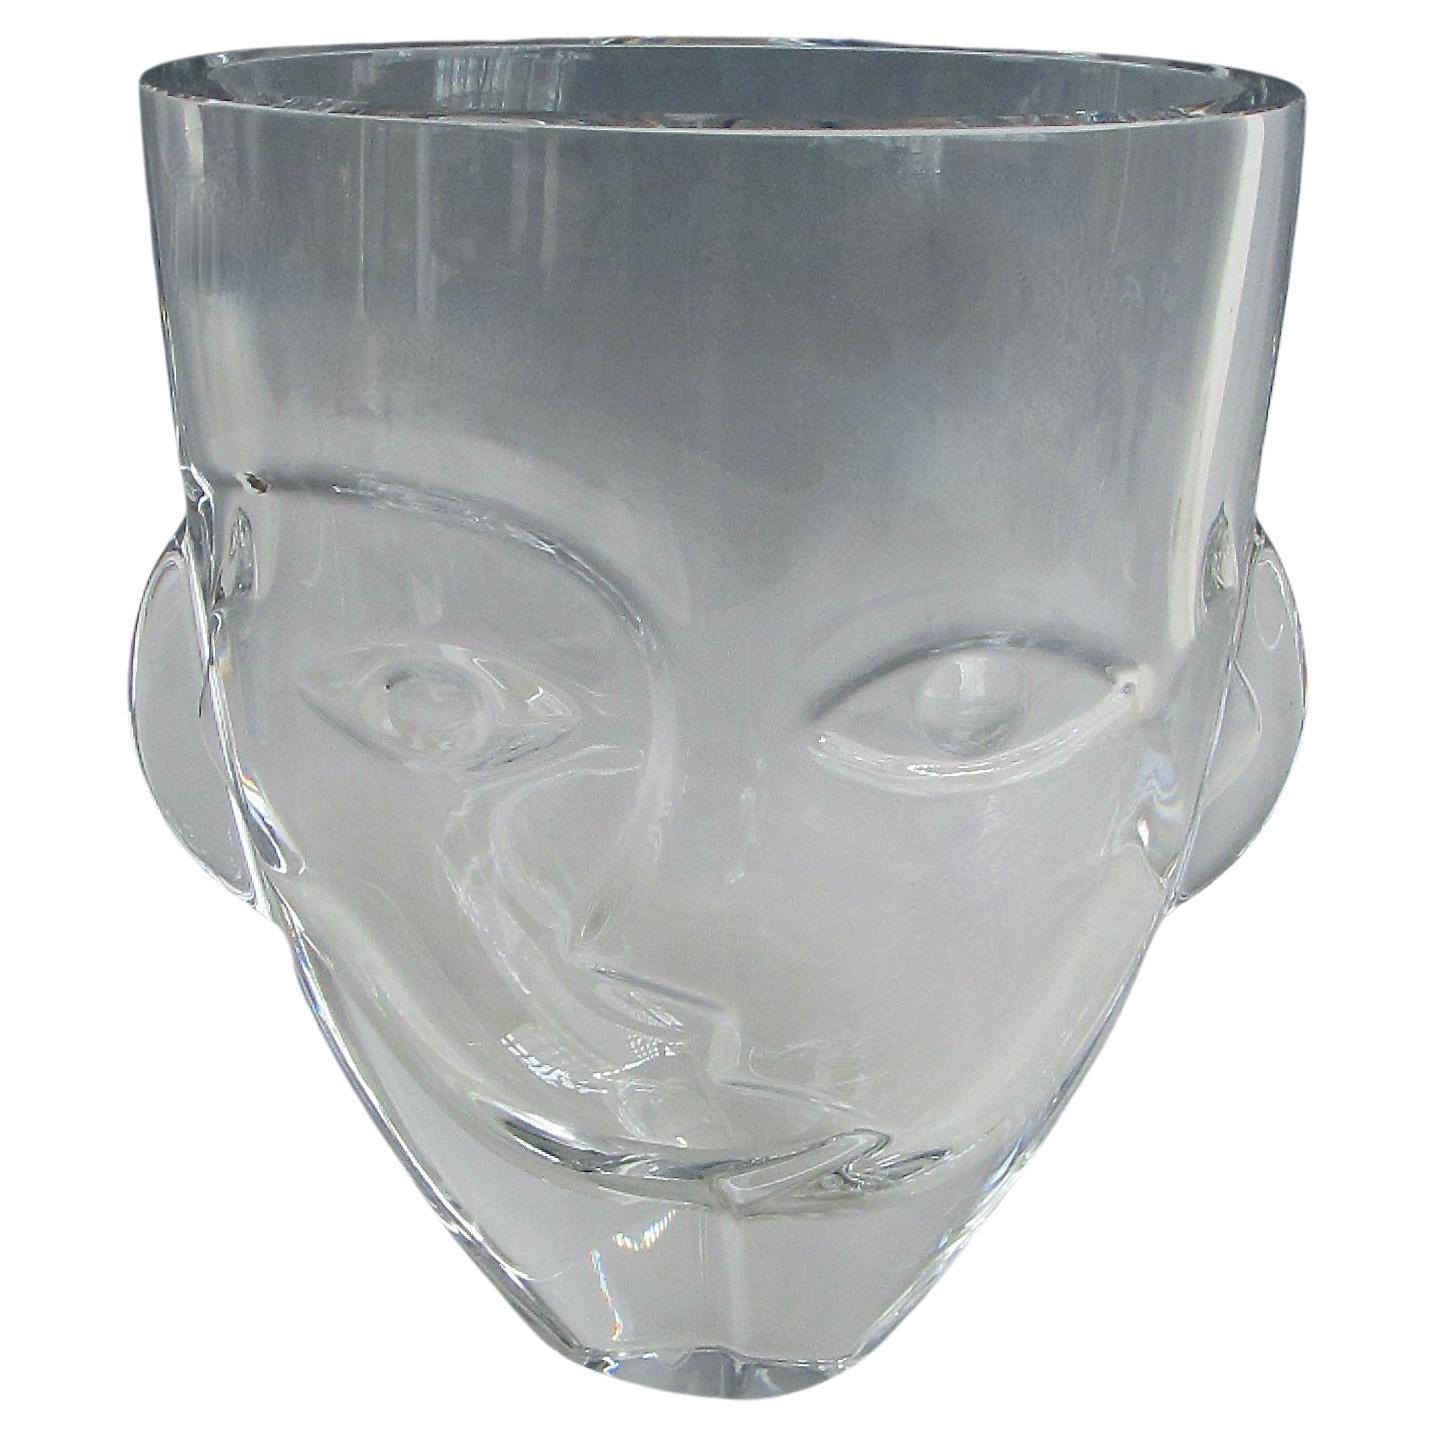 Orrefors Ramses vase designed by Marti Rytkonen . Large and impressive half inch thick clear glass vase depicting the face of Ramses . Glass is in fine condition no issues or apologies . 